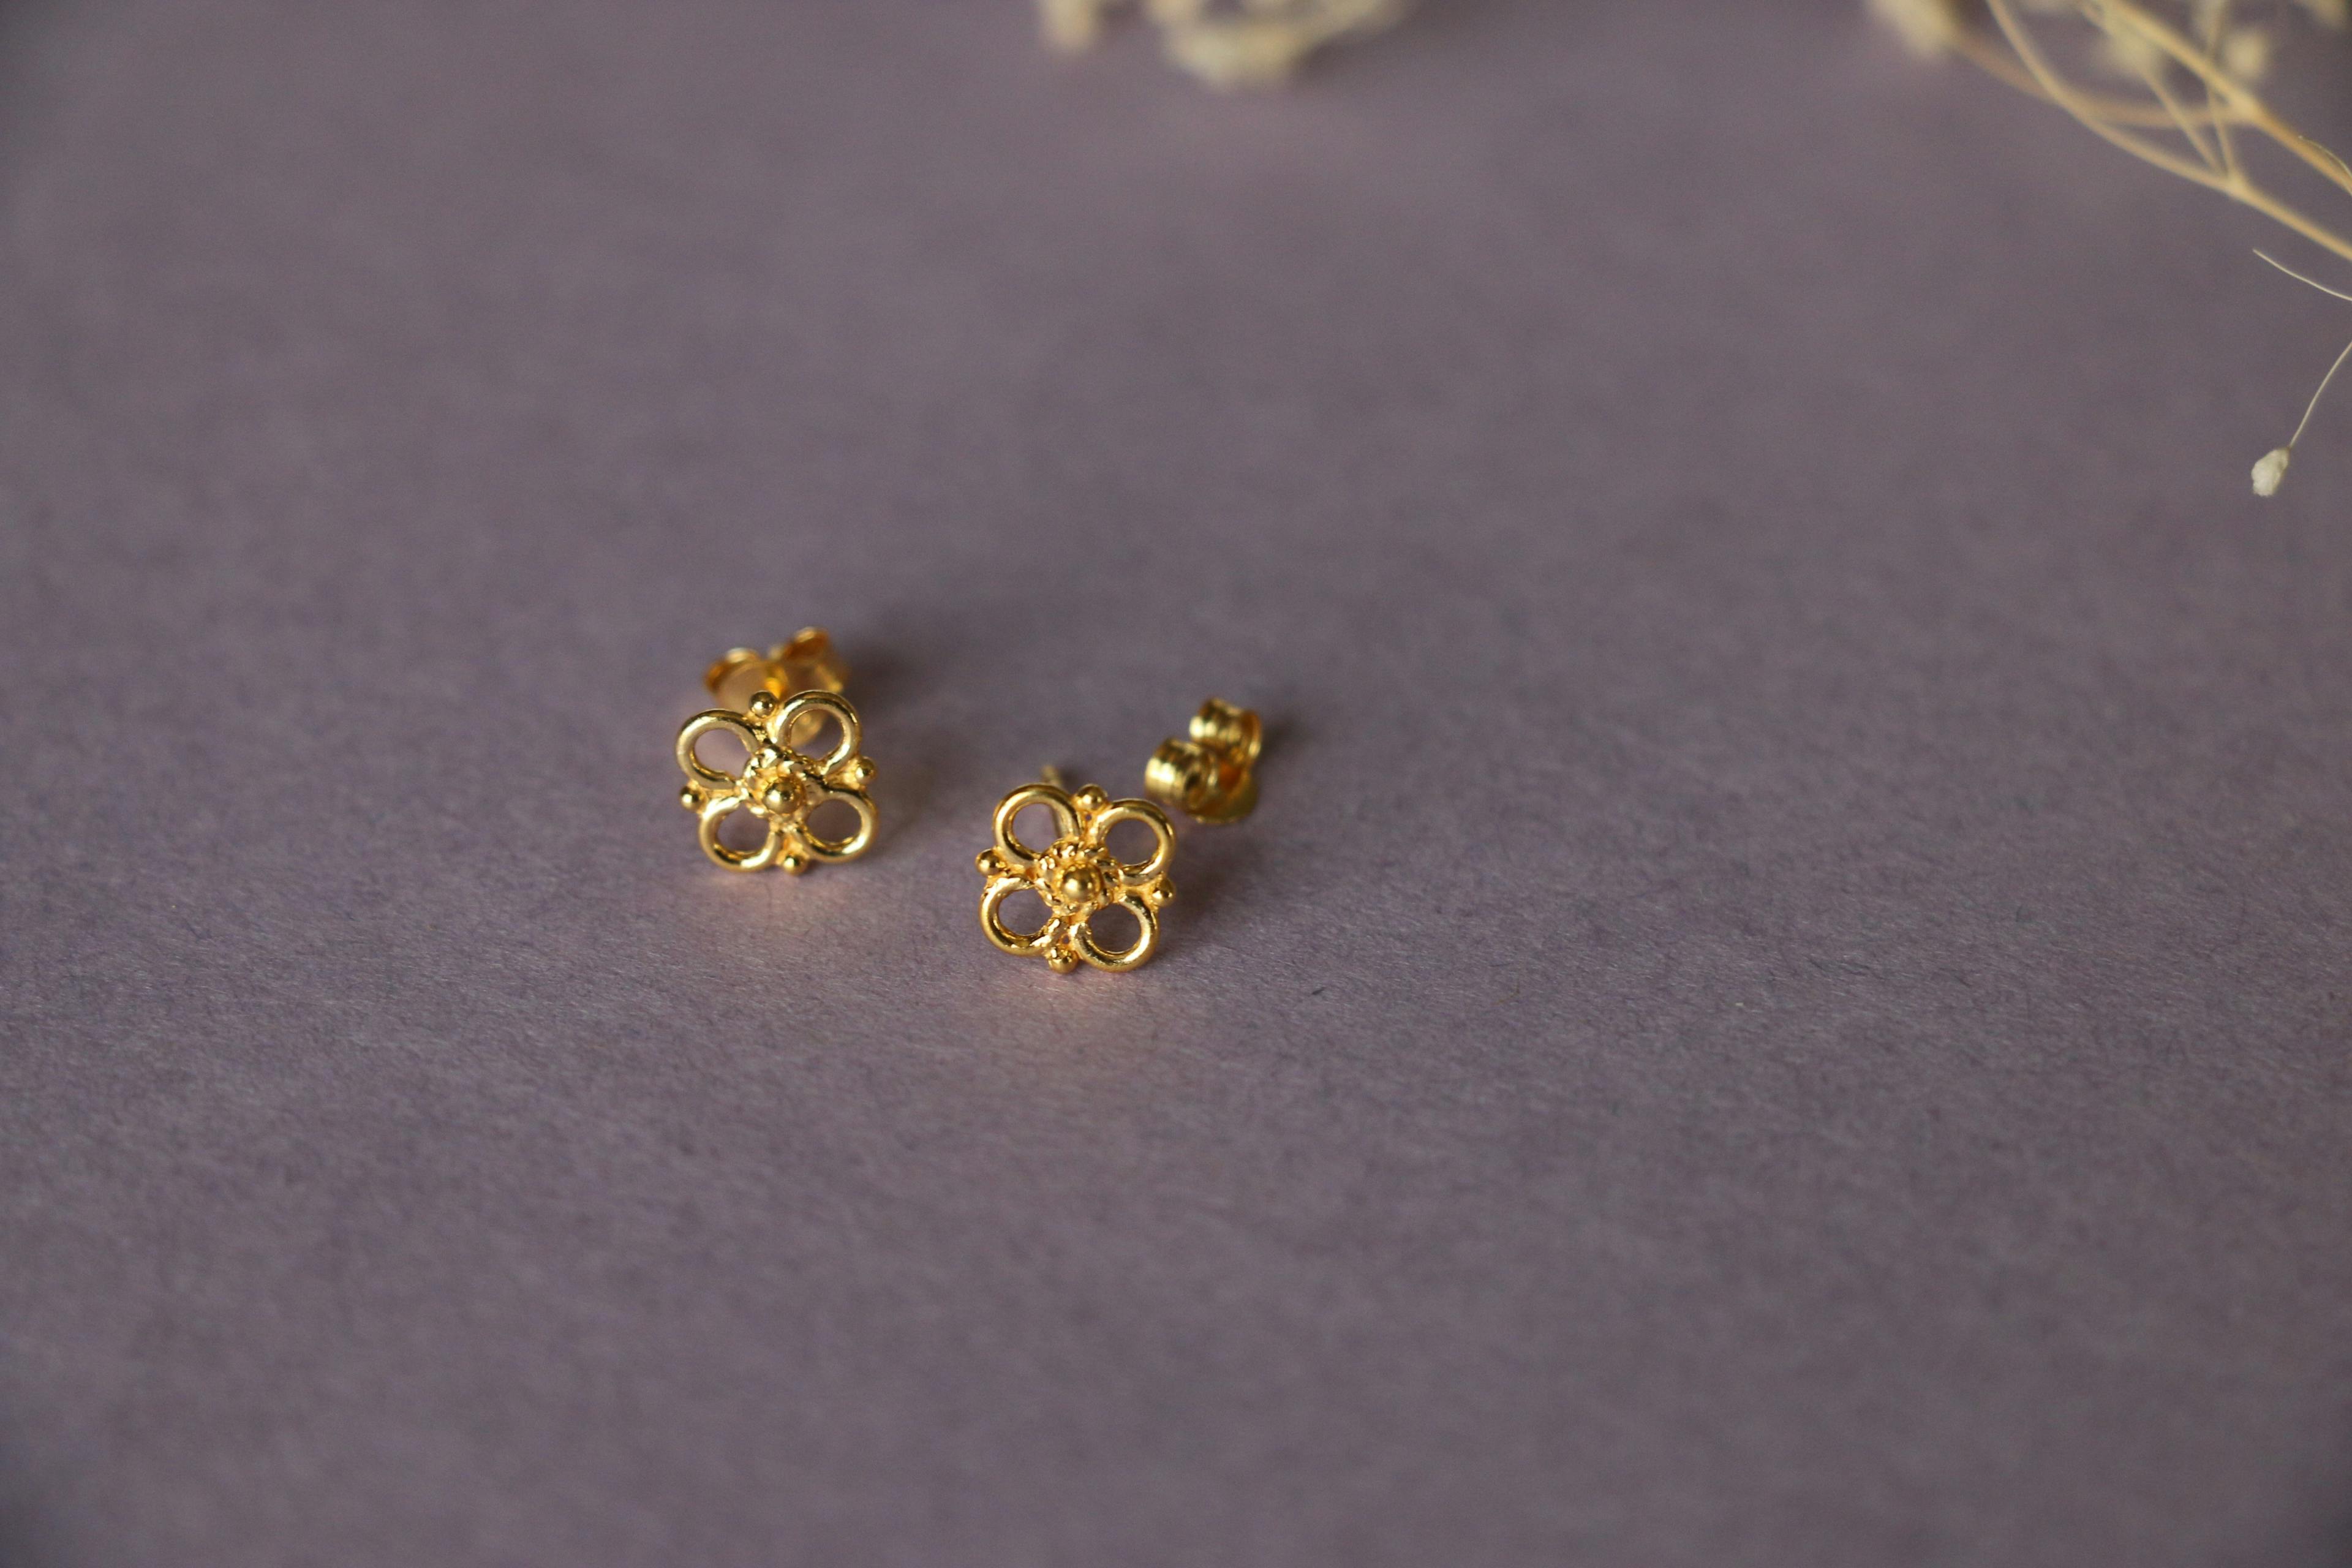 4 petal flower ear studs, a product by The Jewel Closet Store